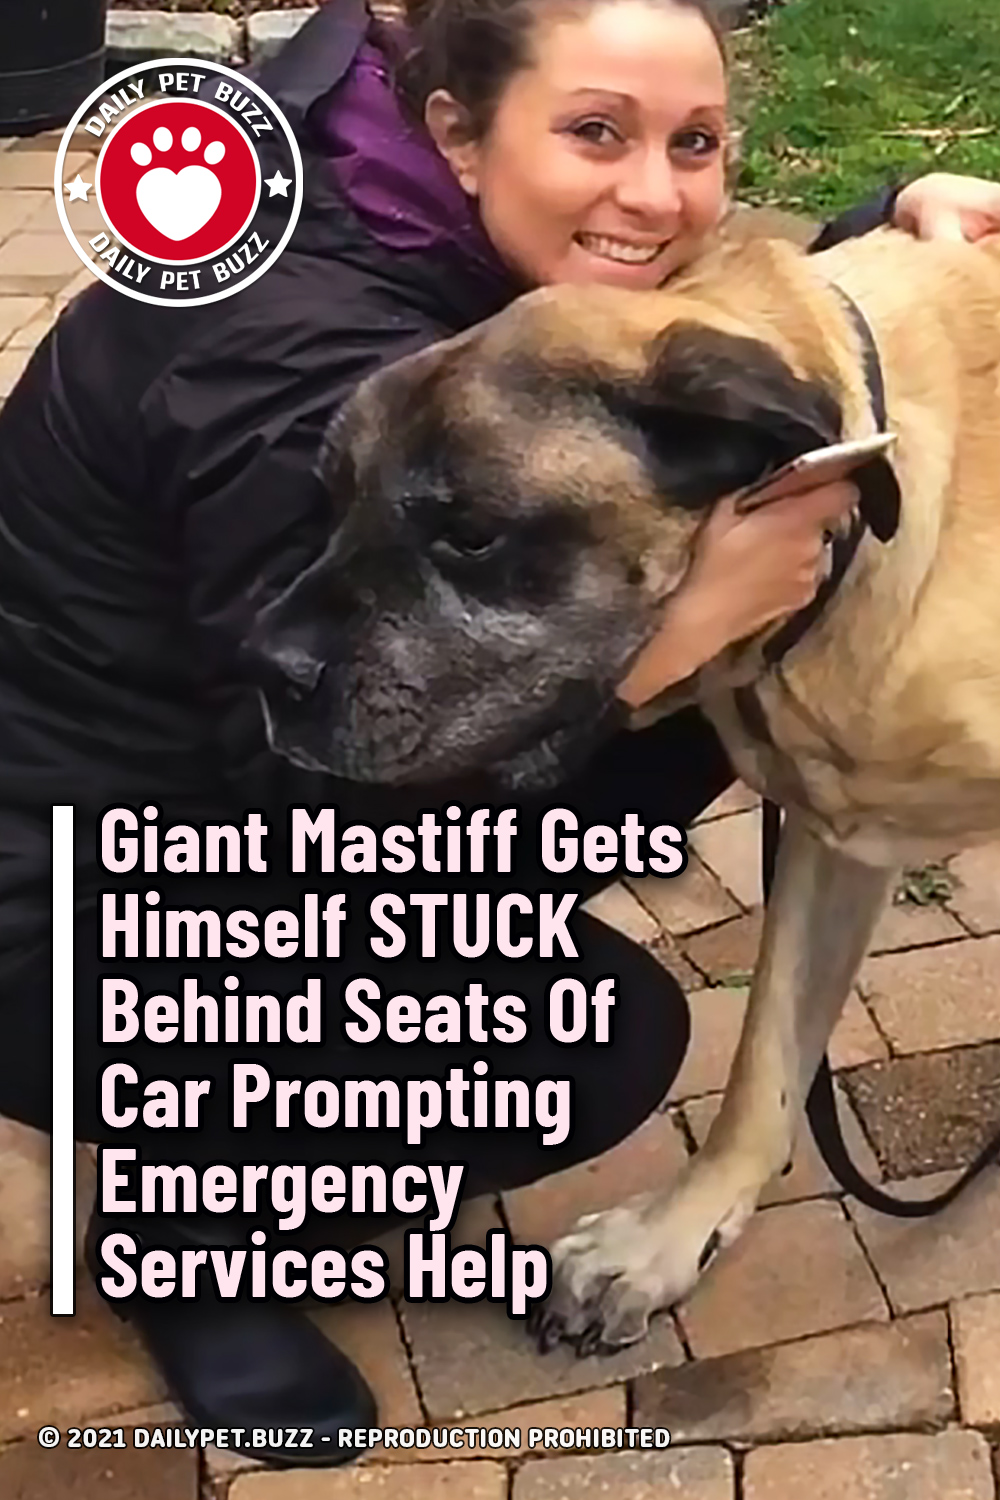 Giant Mastiff Gets Himself STUCK Behind Seats Of Car Prompting Emergency Services Help